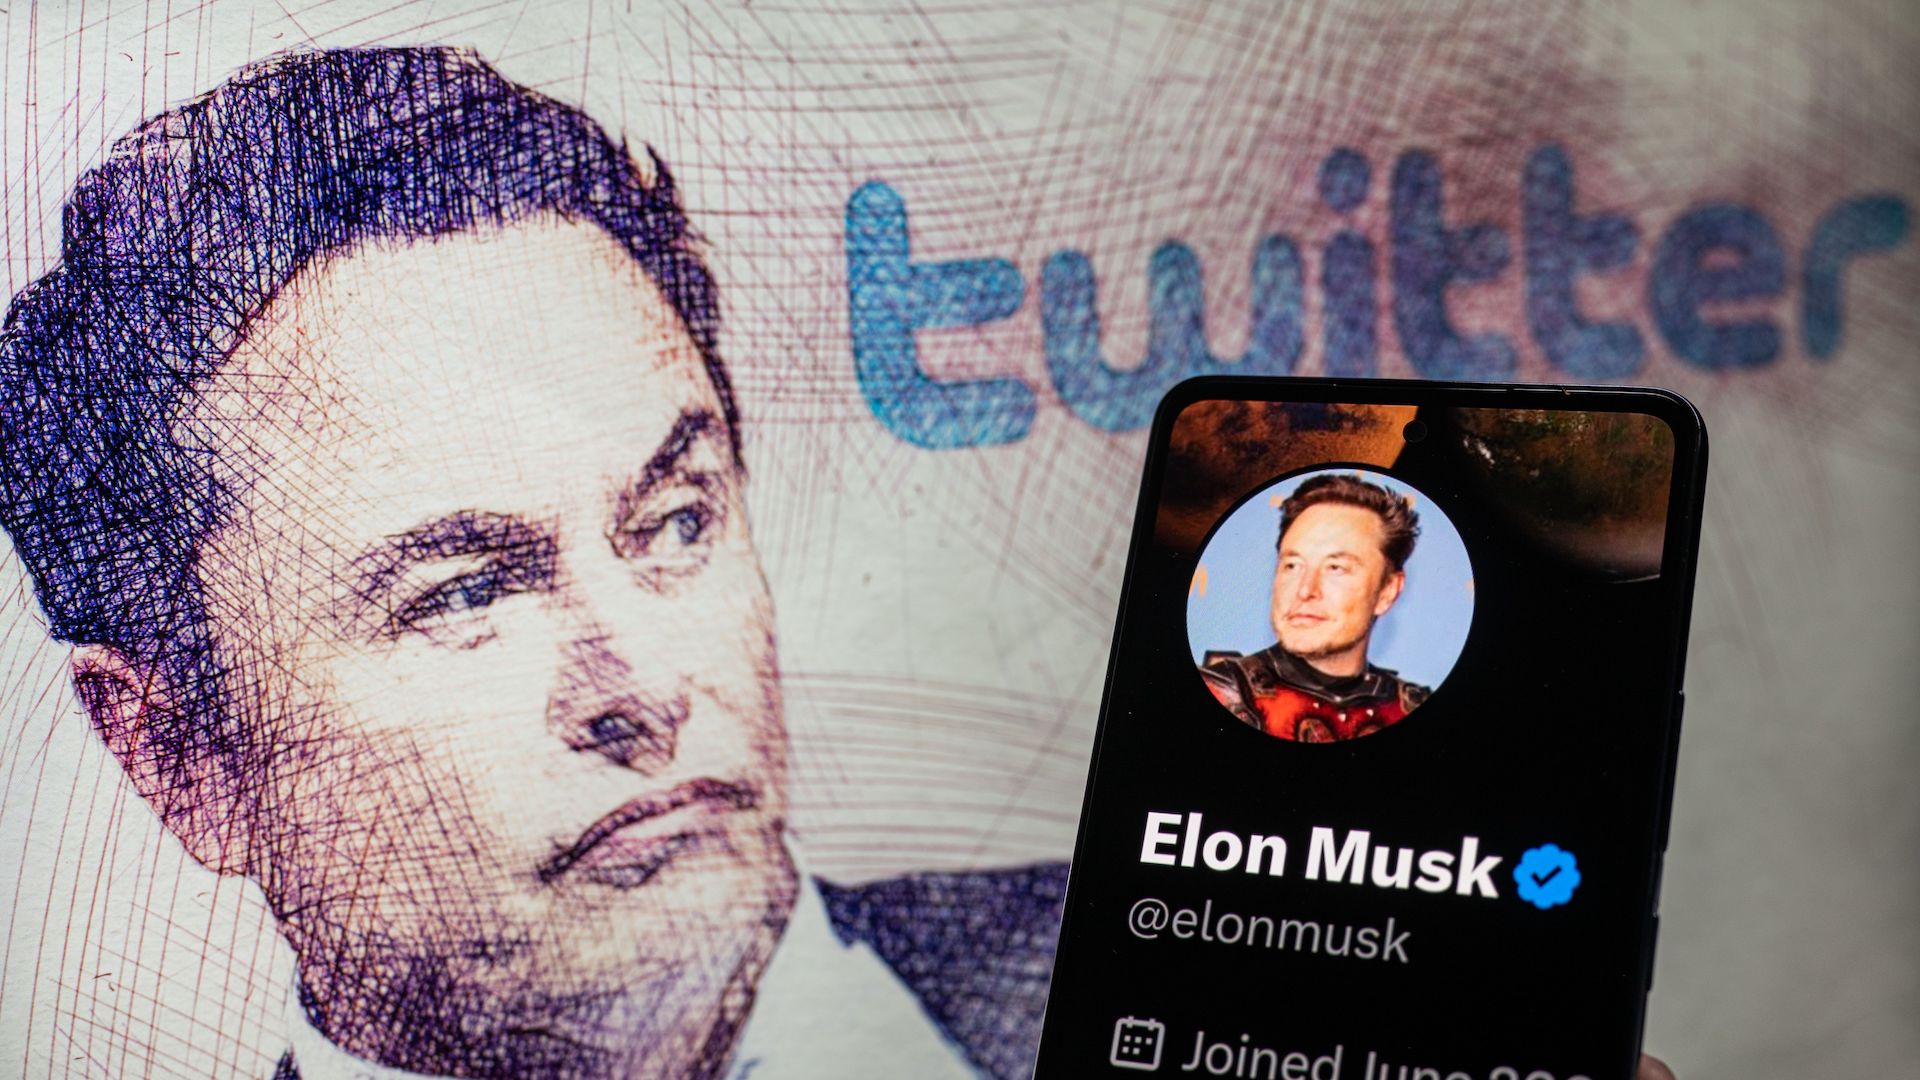 Elon Musk Twitter account seen on Mobile with Elon Musk in the background on screen, seen in this photo illustration.